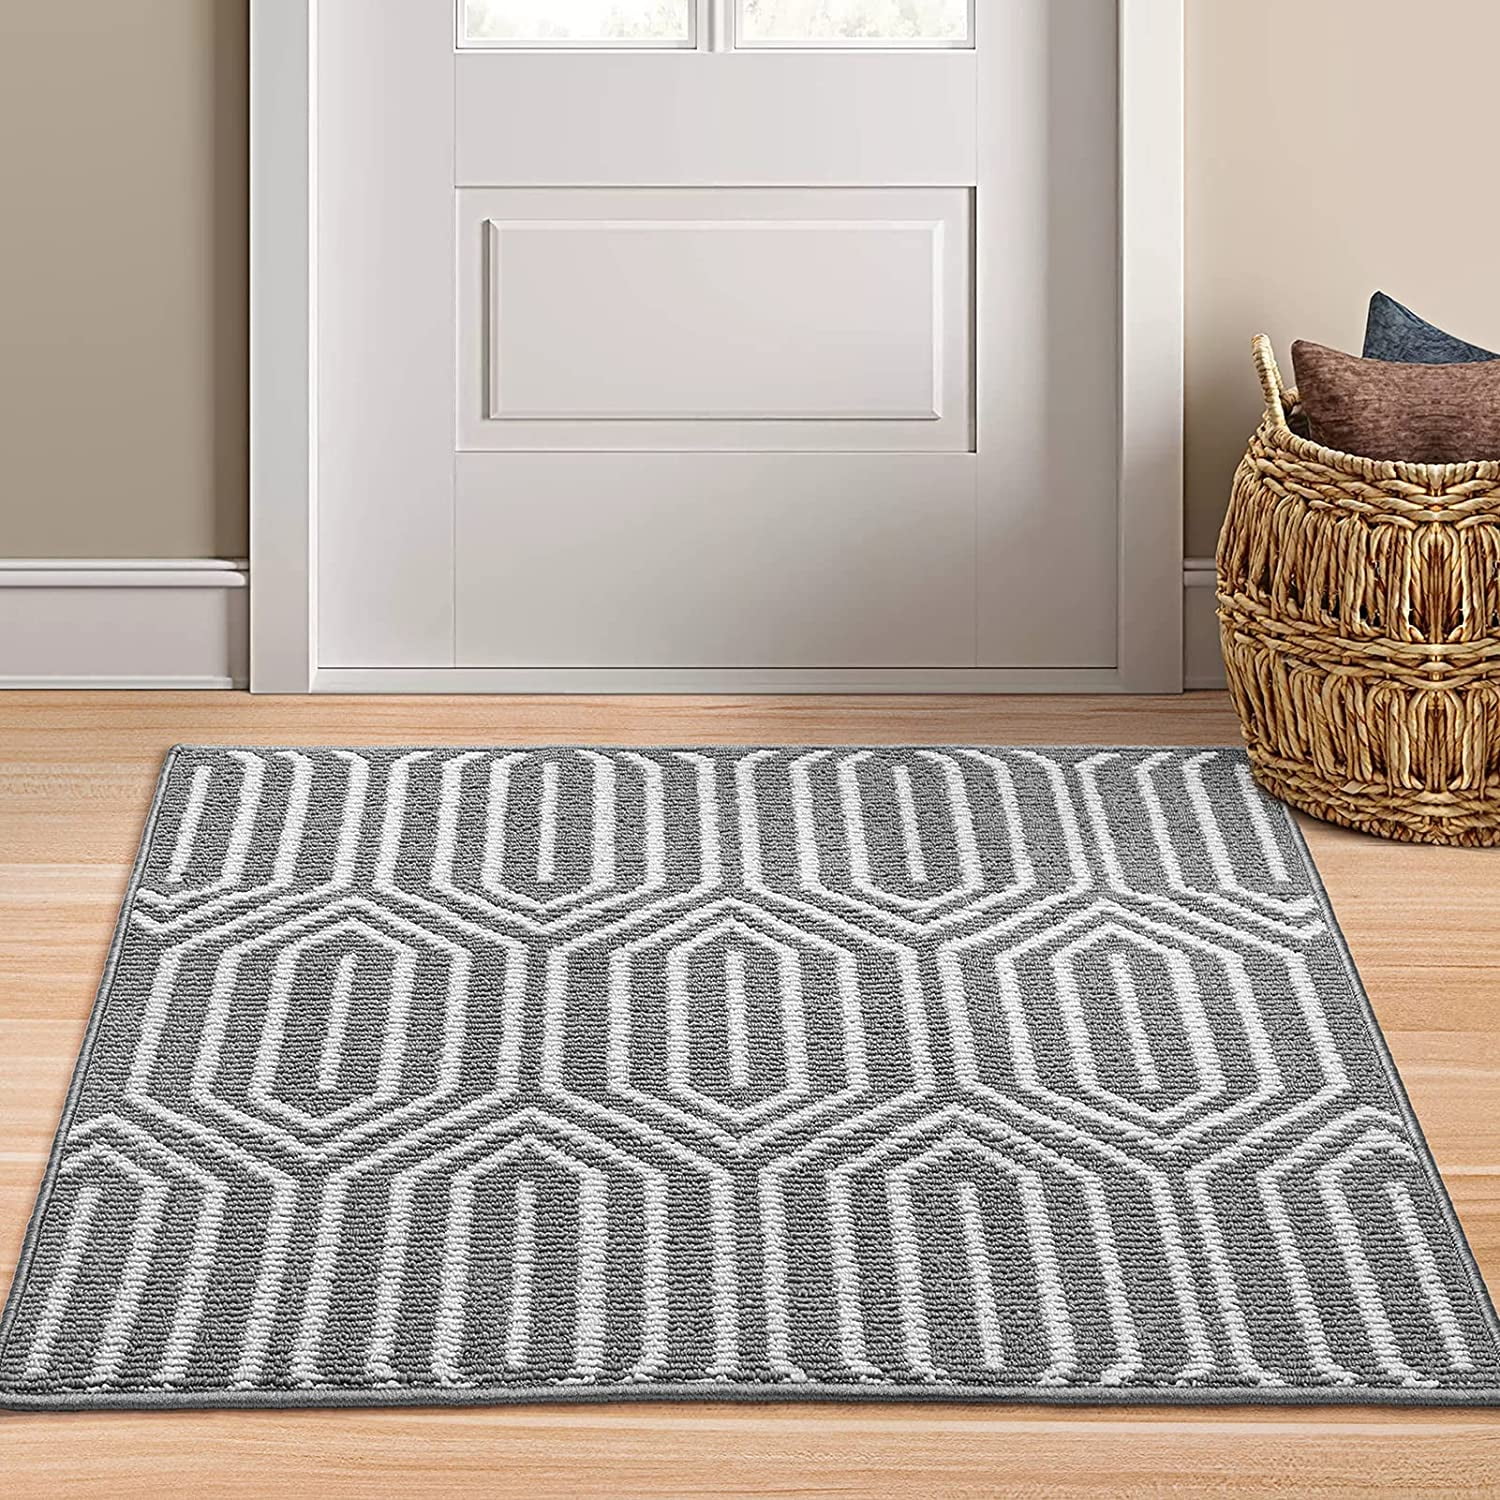 3 Pieces Welcome Front Door Mat Rug Home Sweet Home Doormat with Non-Slip Rubber Backing Buffalo Plaid Rug Entryway Outdoor Indoor Mats Absorb Mud Easy Clean Front Entrance Doormat 